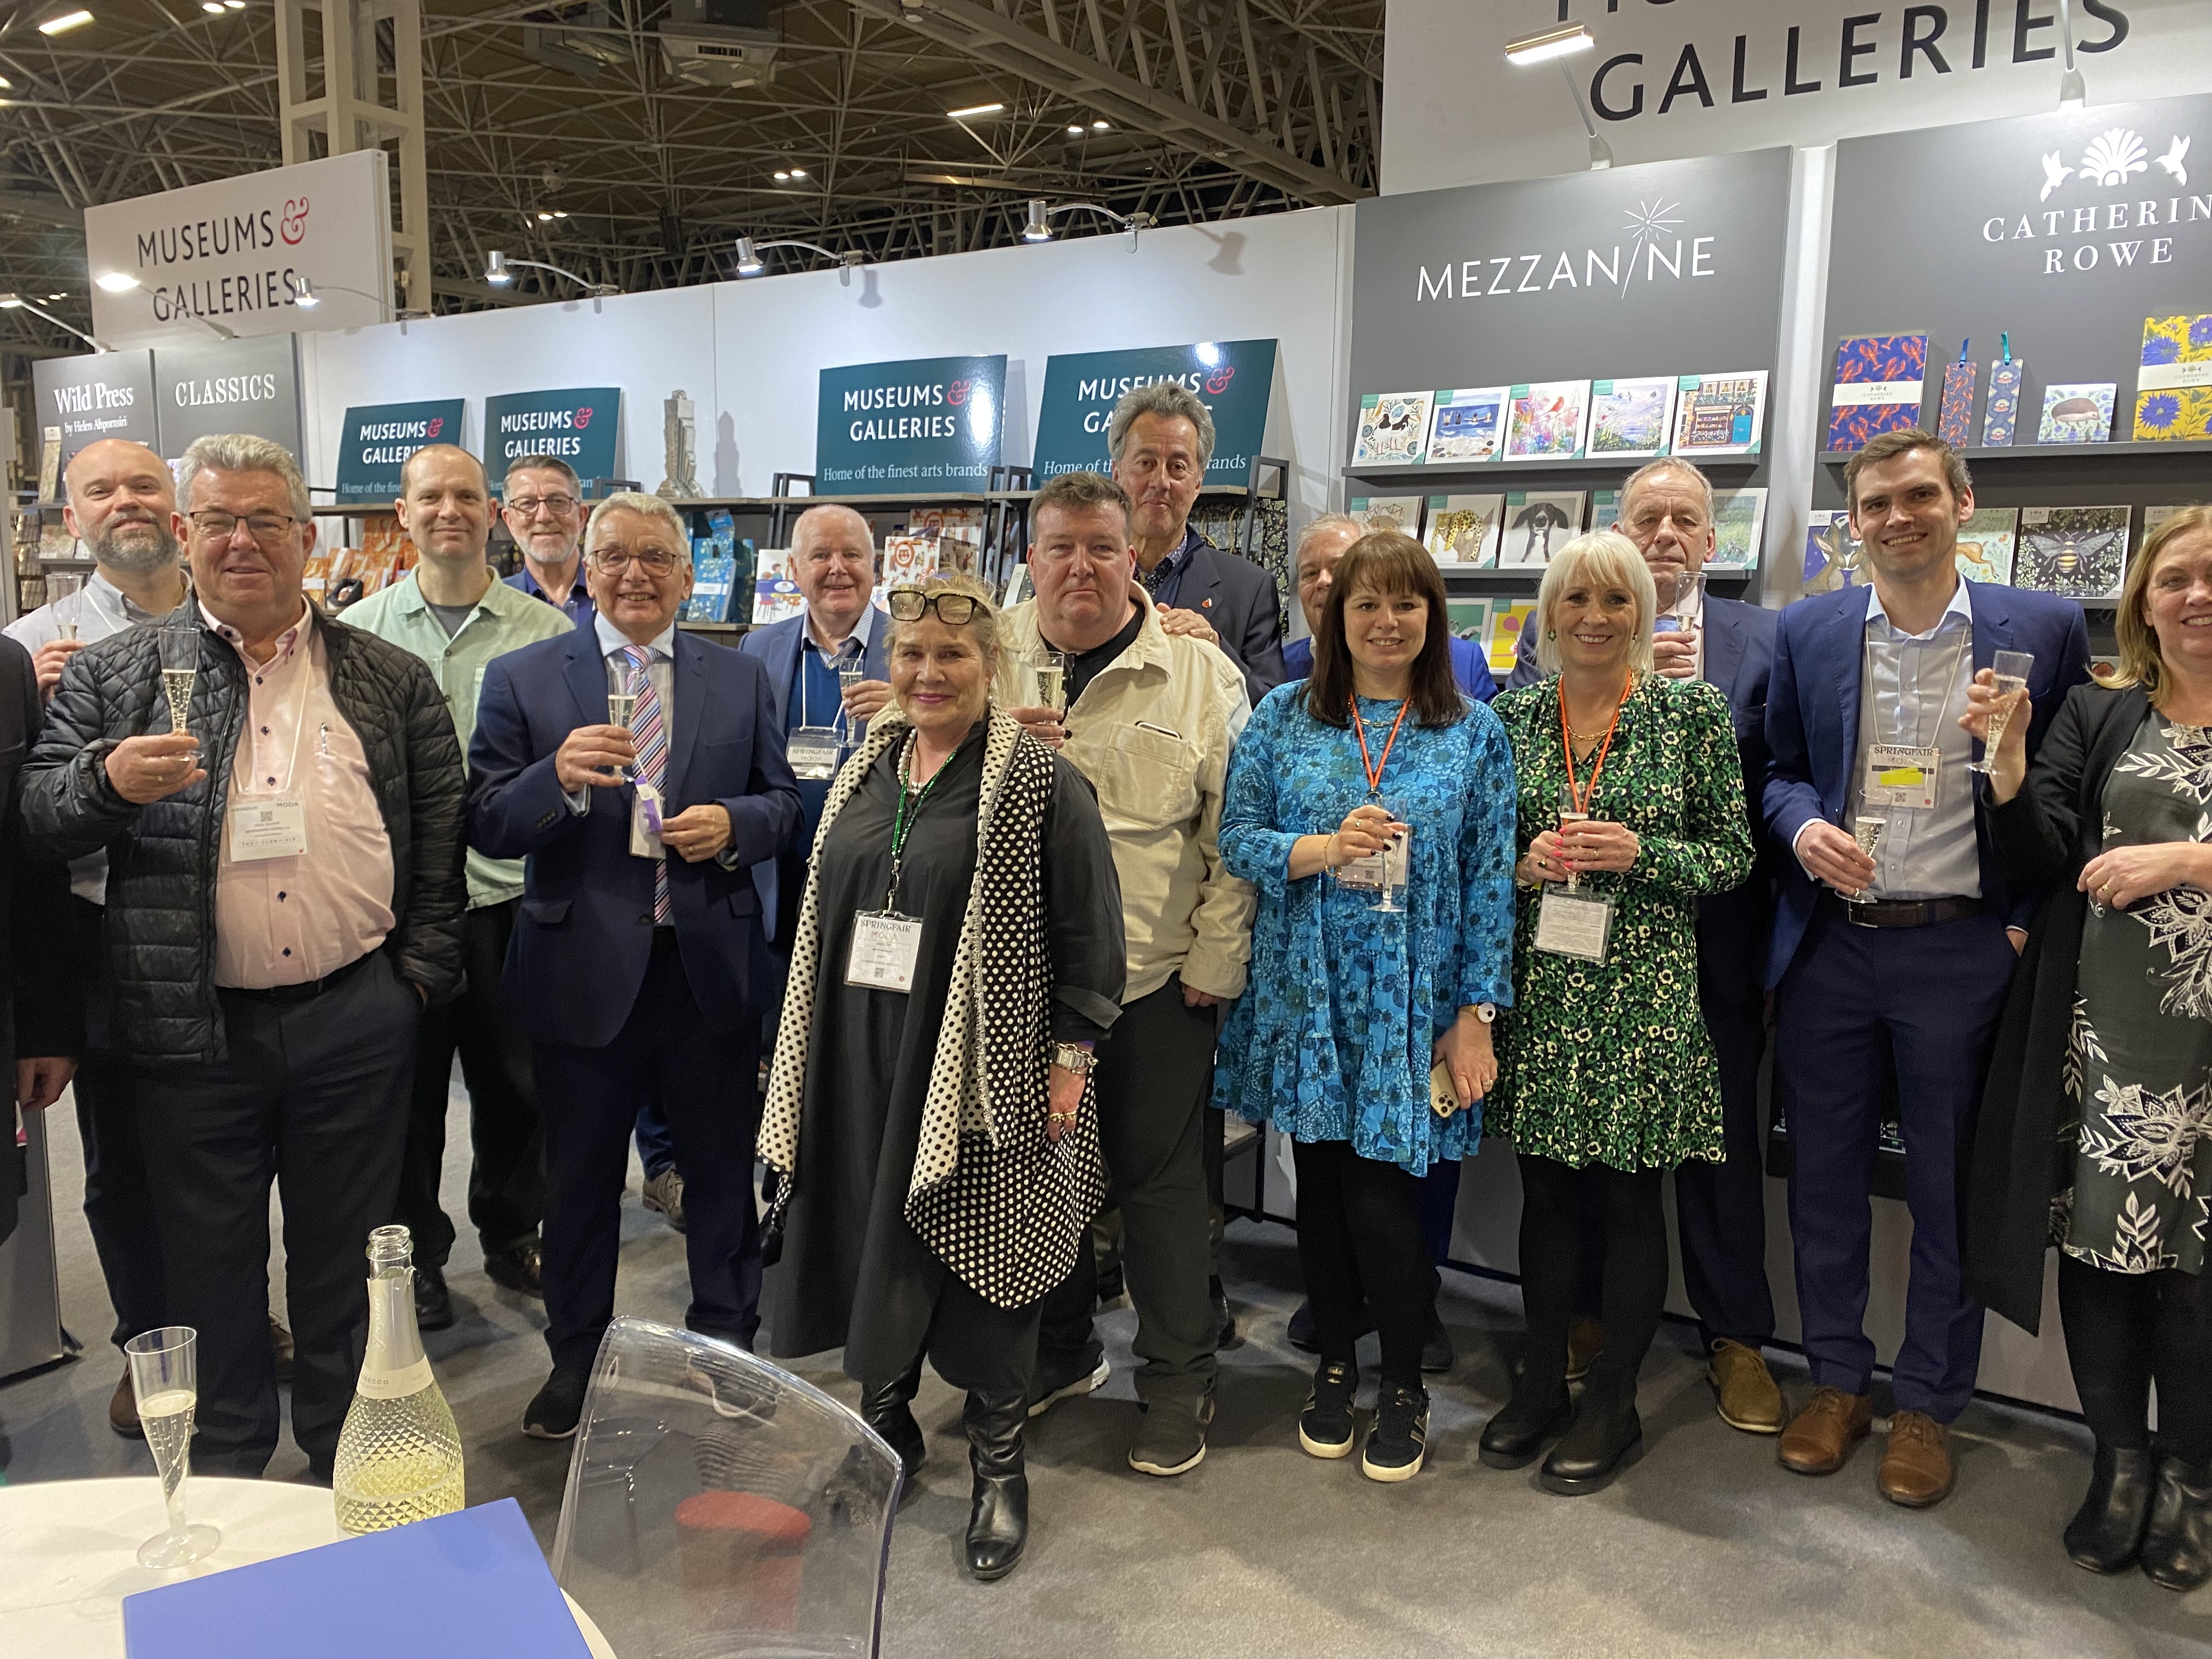 Above: After 44 years in the greeting card industry, the once met, never forgotten popular stalwart Riou Baxter enjoyed a great send off into retirement thanks to the Museums & Galleries team